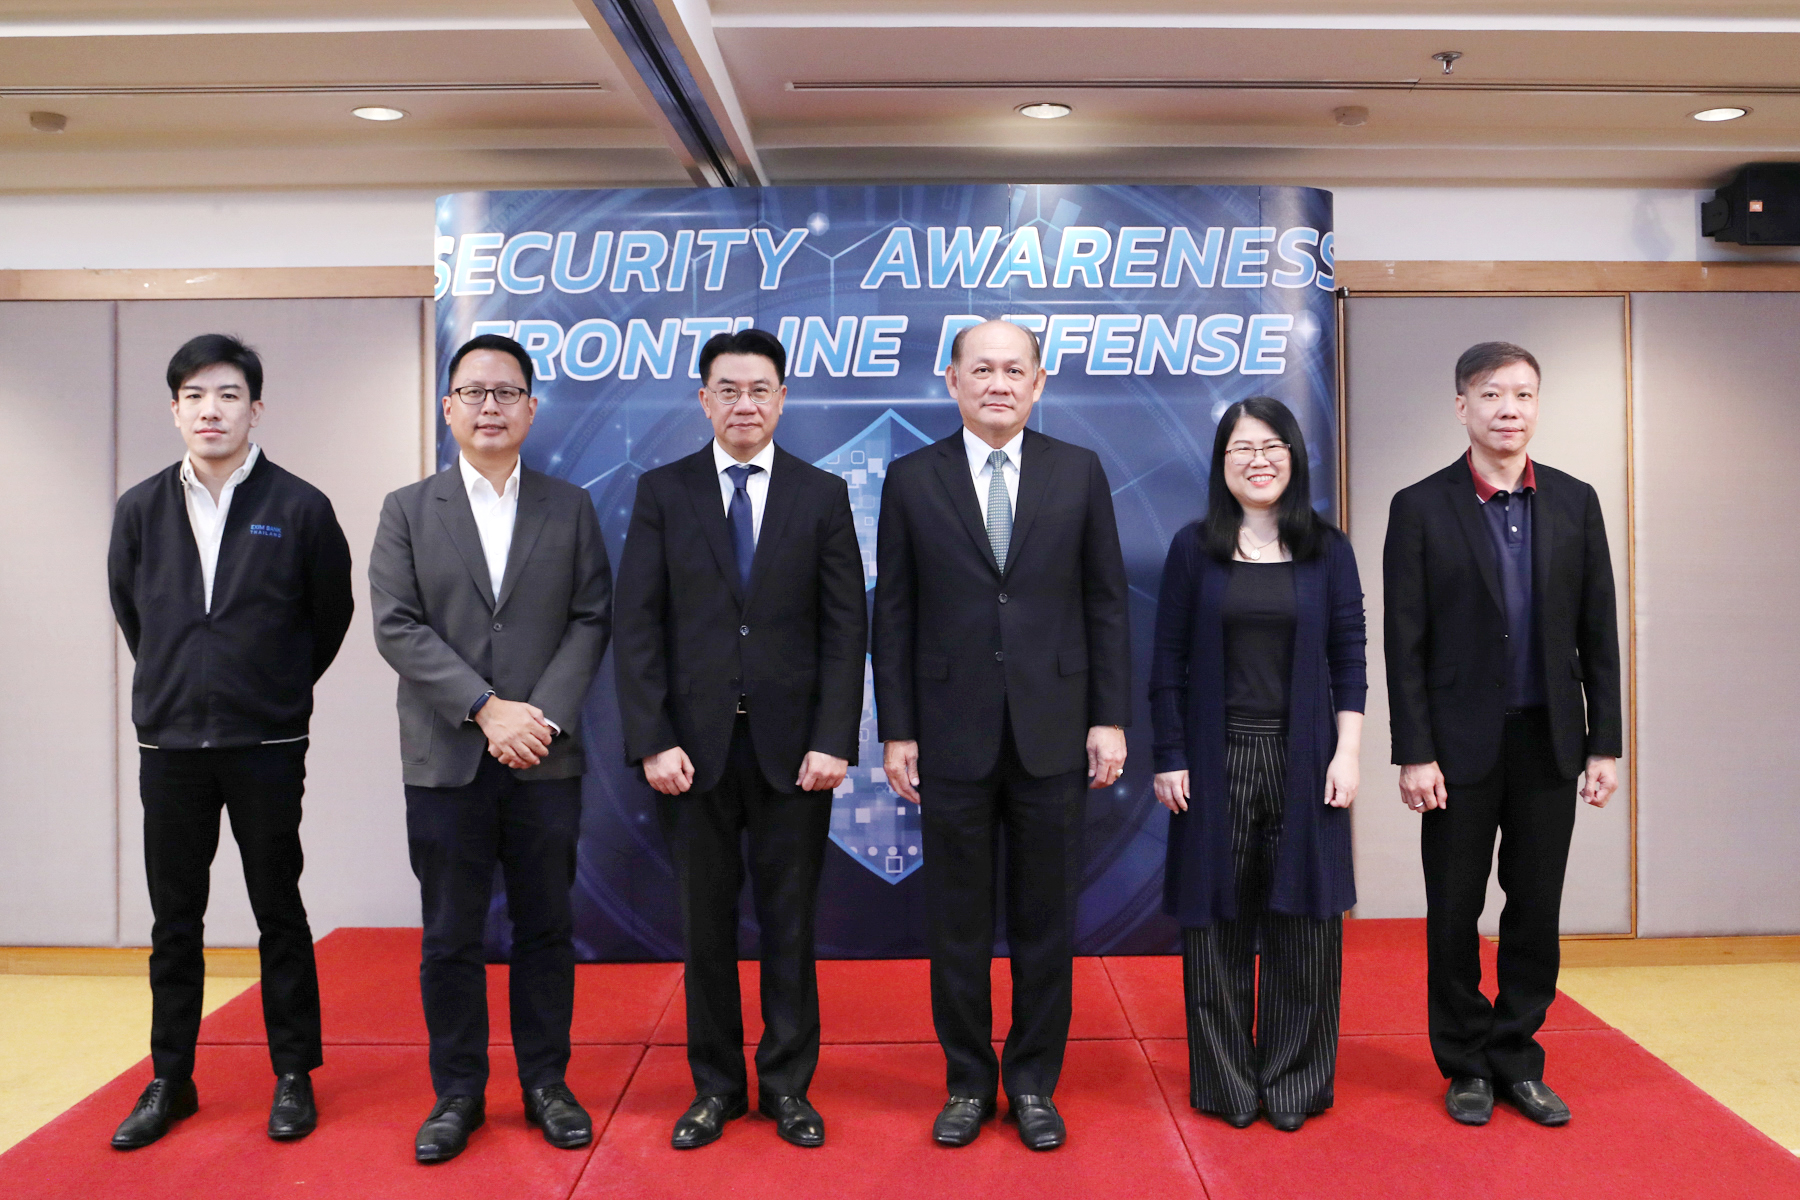 EXIM Thailand Holds Seminar to Promote Knowledge and Understanding of Security Awareness